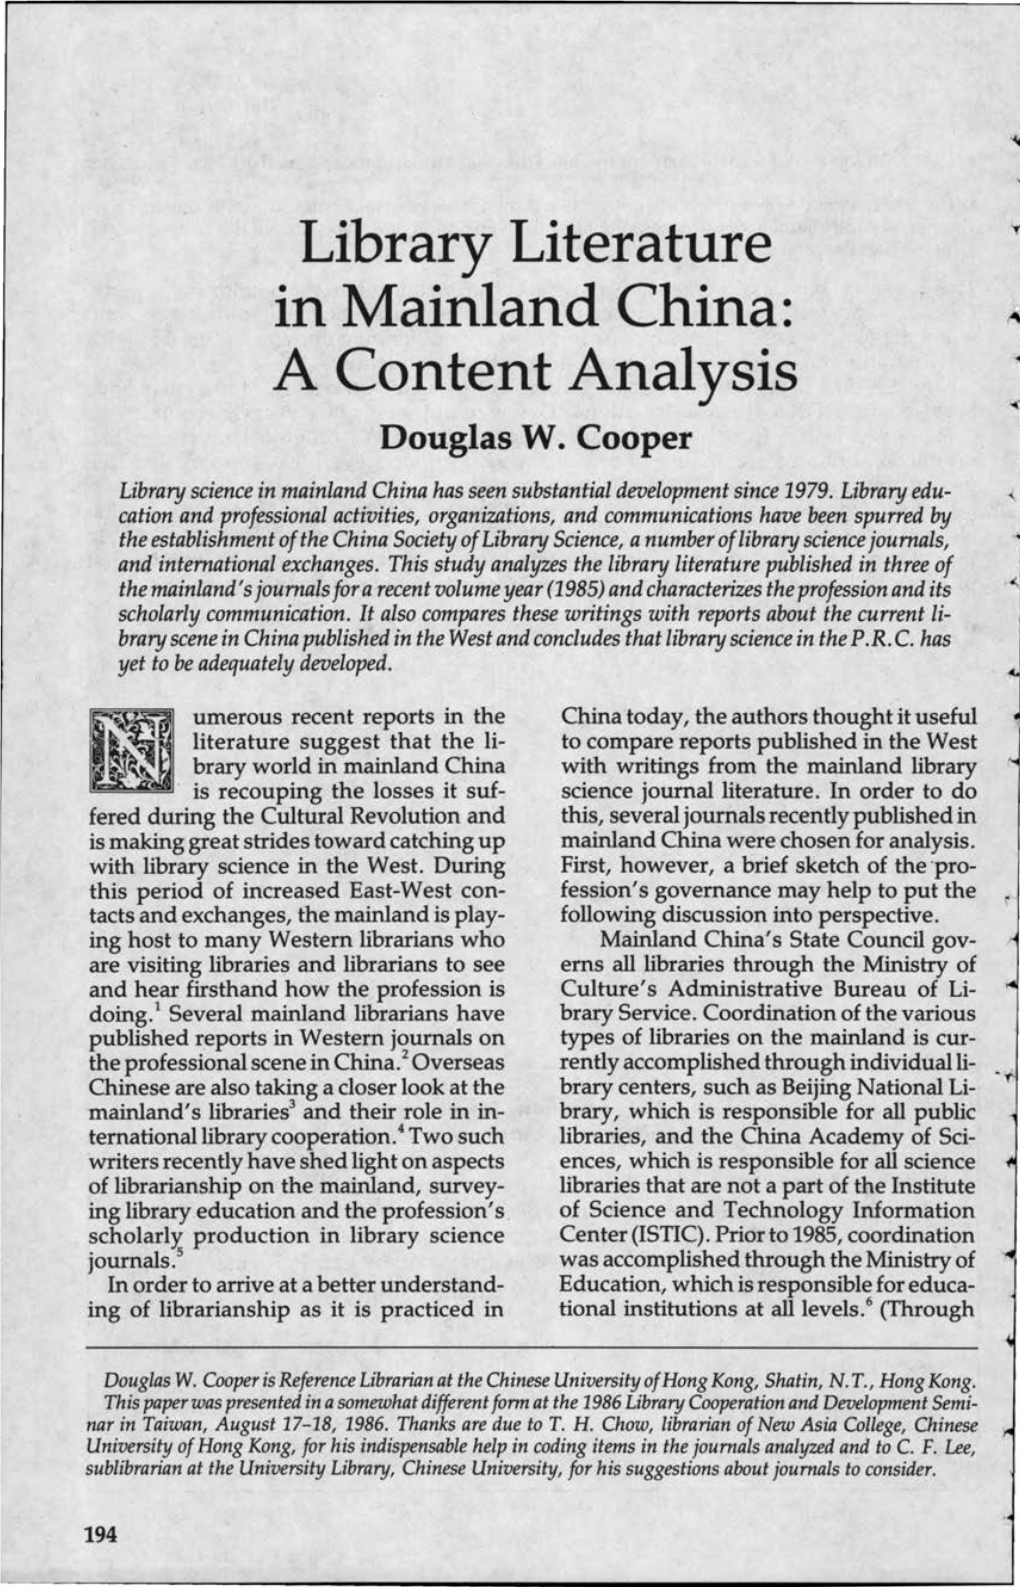 In Mainland China: a Content Analysis Douglas W